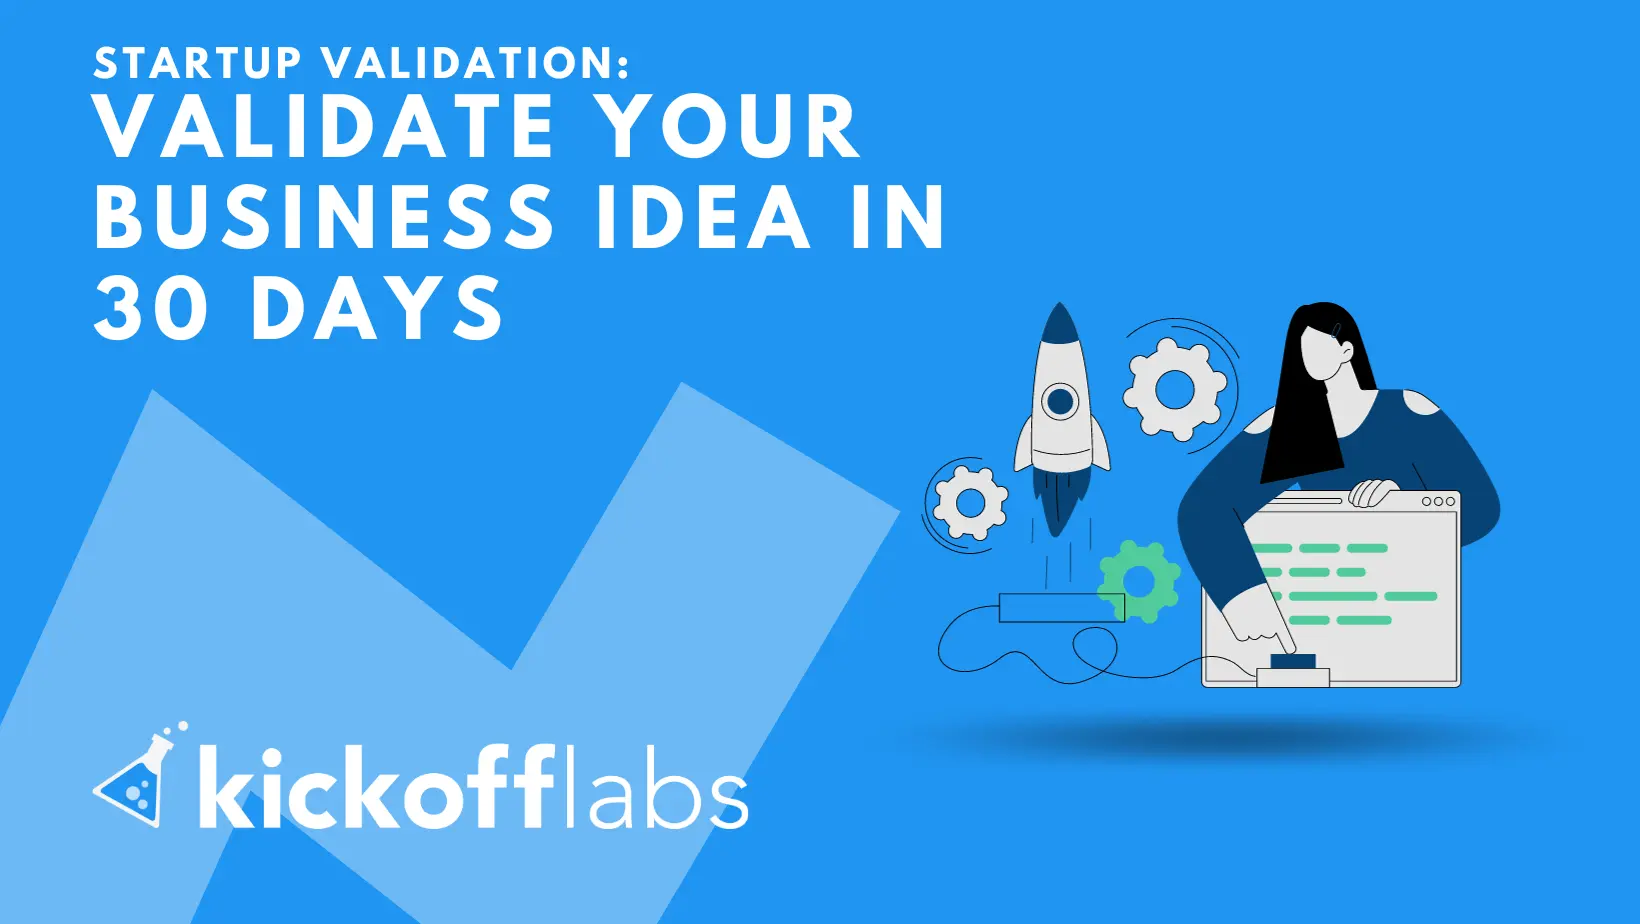 How to Validate Your Business Idea in 30 Days